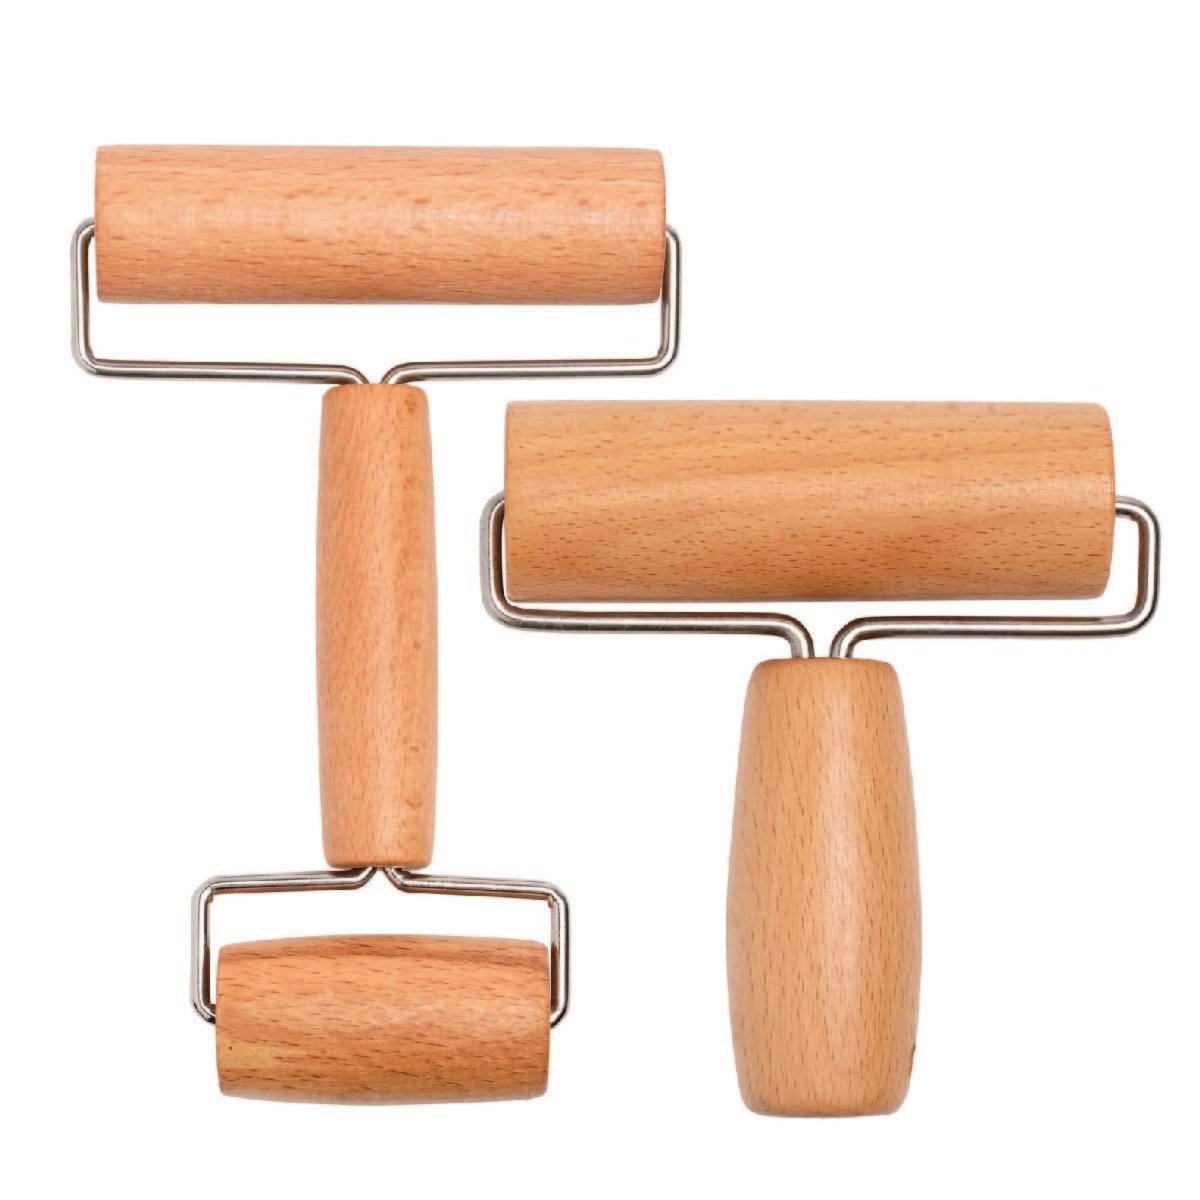 Two wooden pastry rollers with three different-sized wheels.